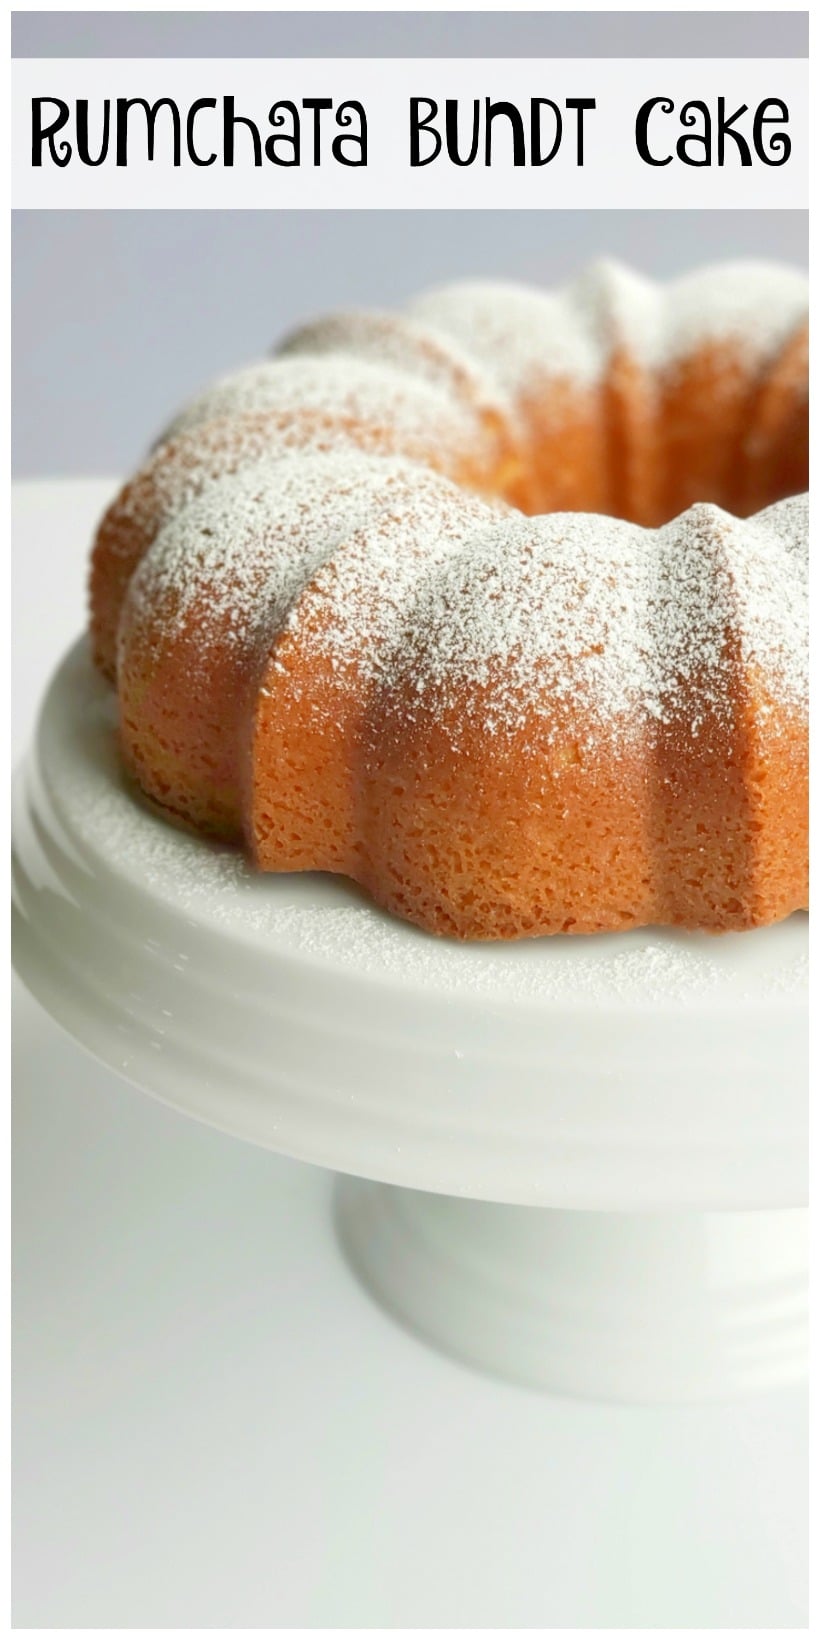 RumChata Bundt Cake in text with cake on a cake stand.